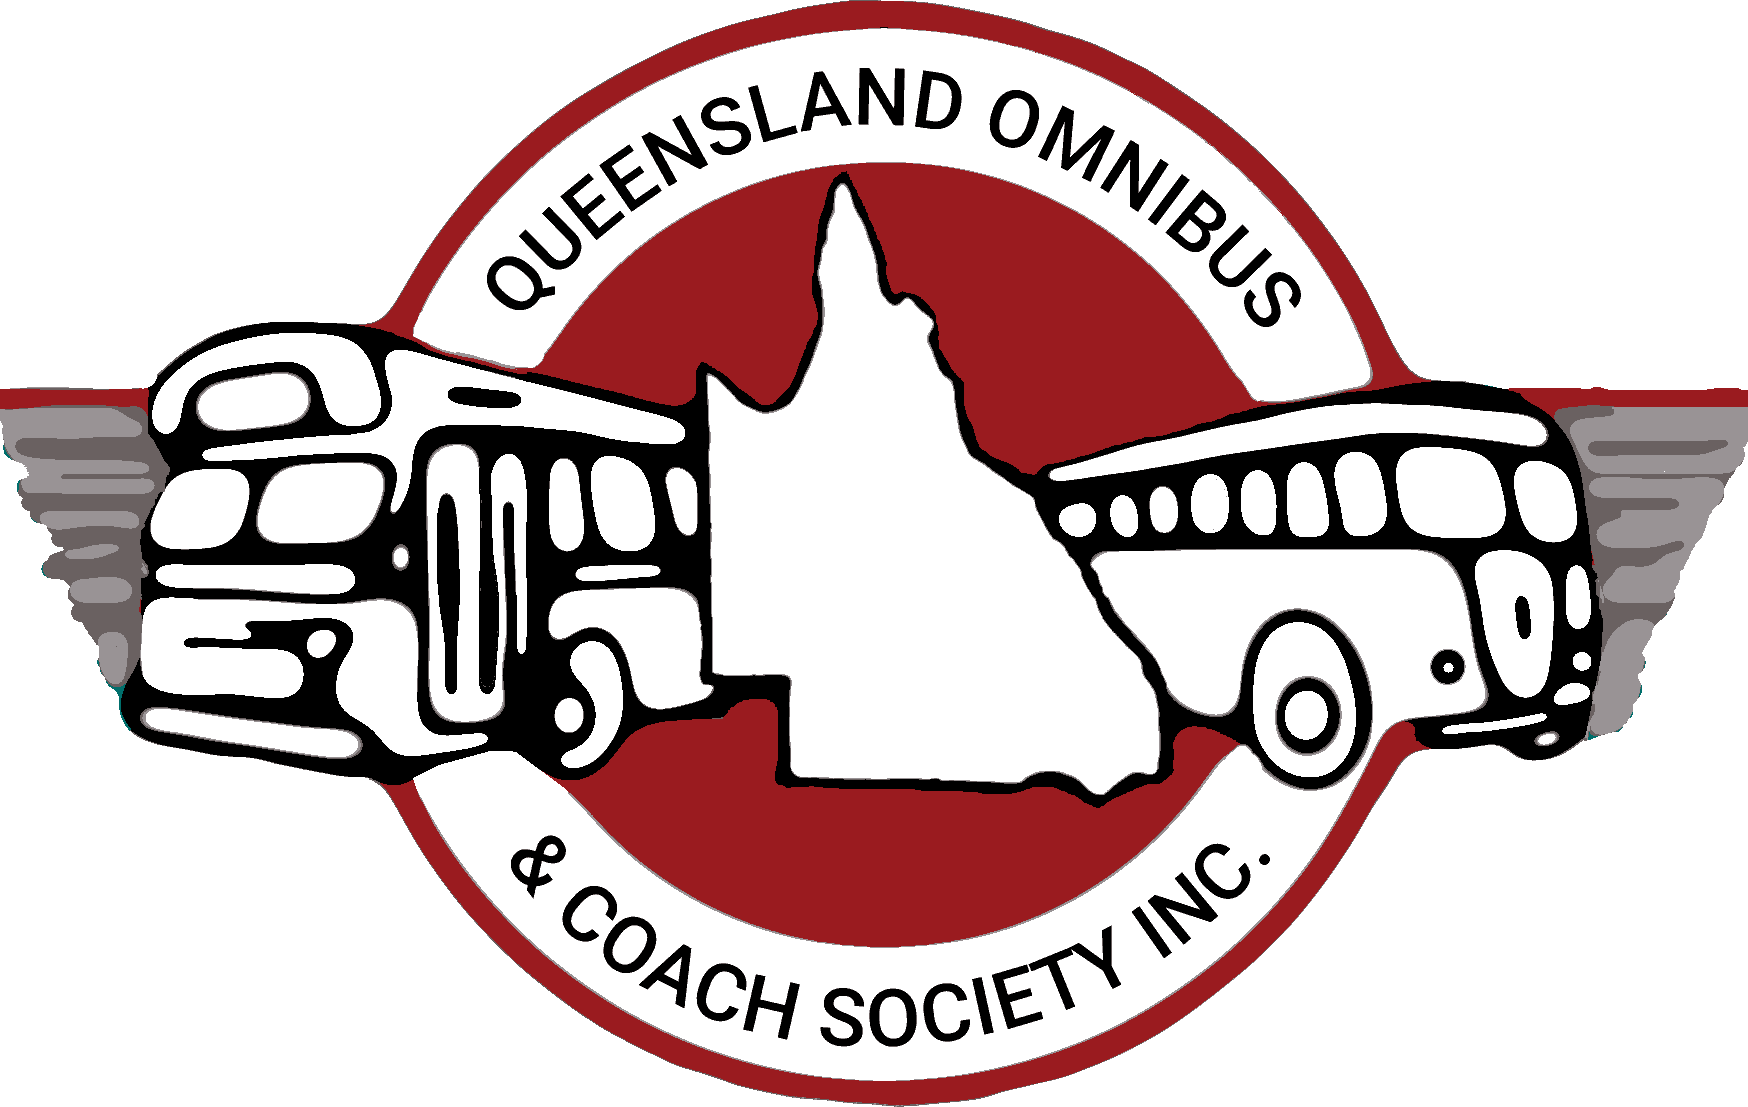 Qld Omnibus and Coach Society 